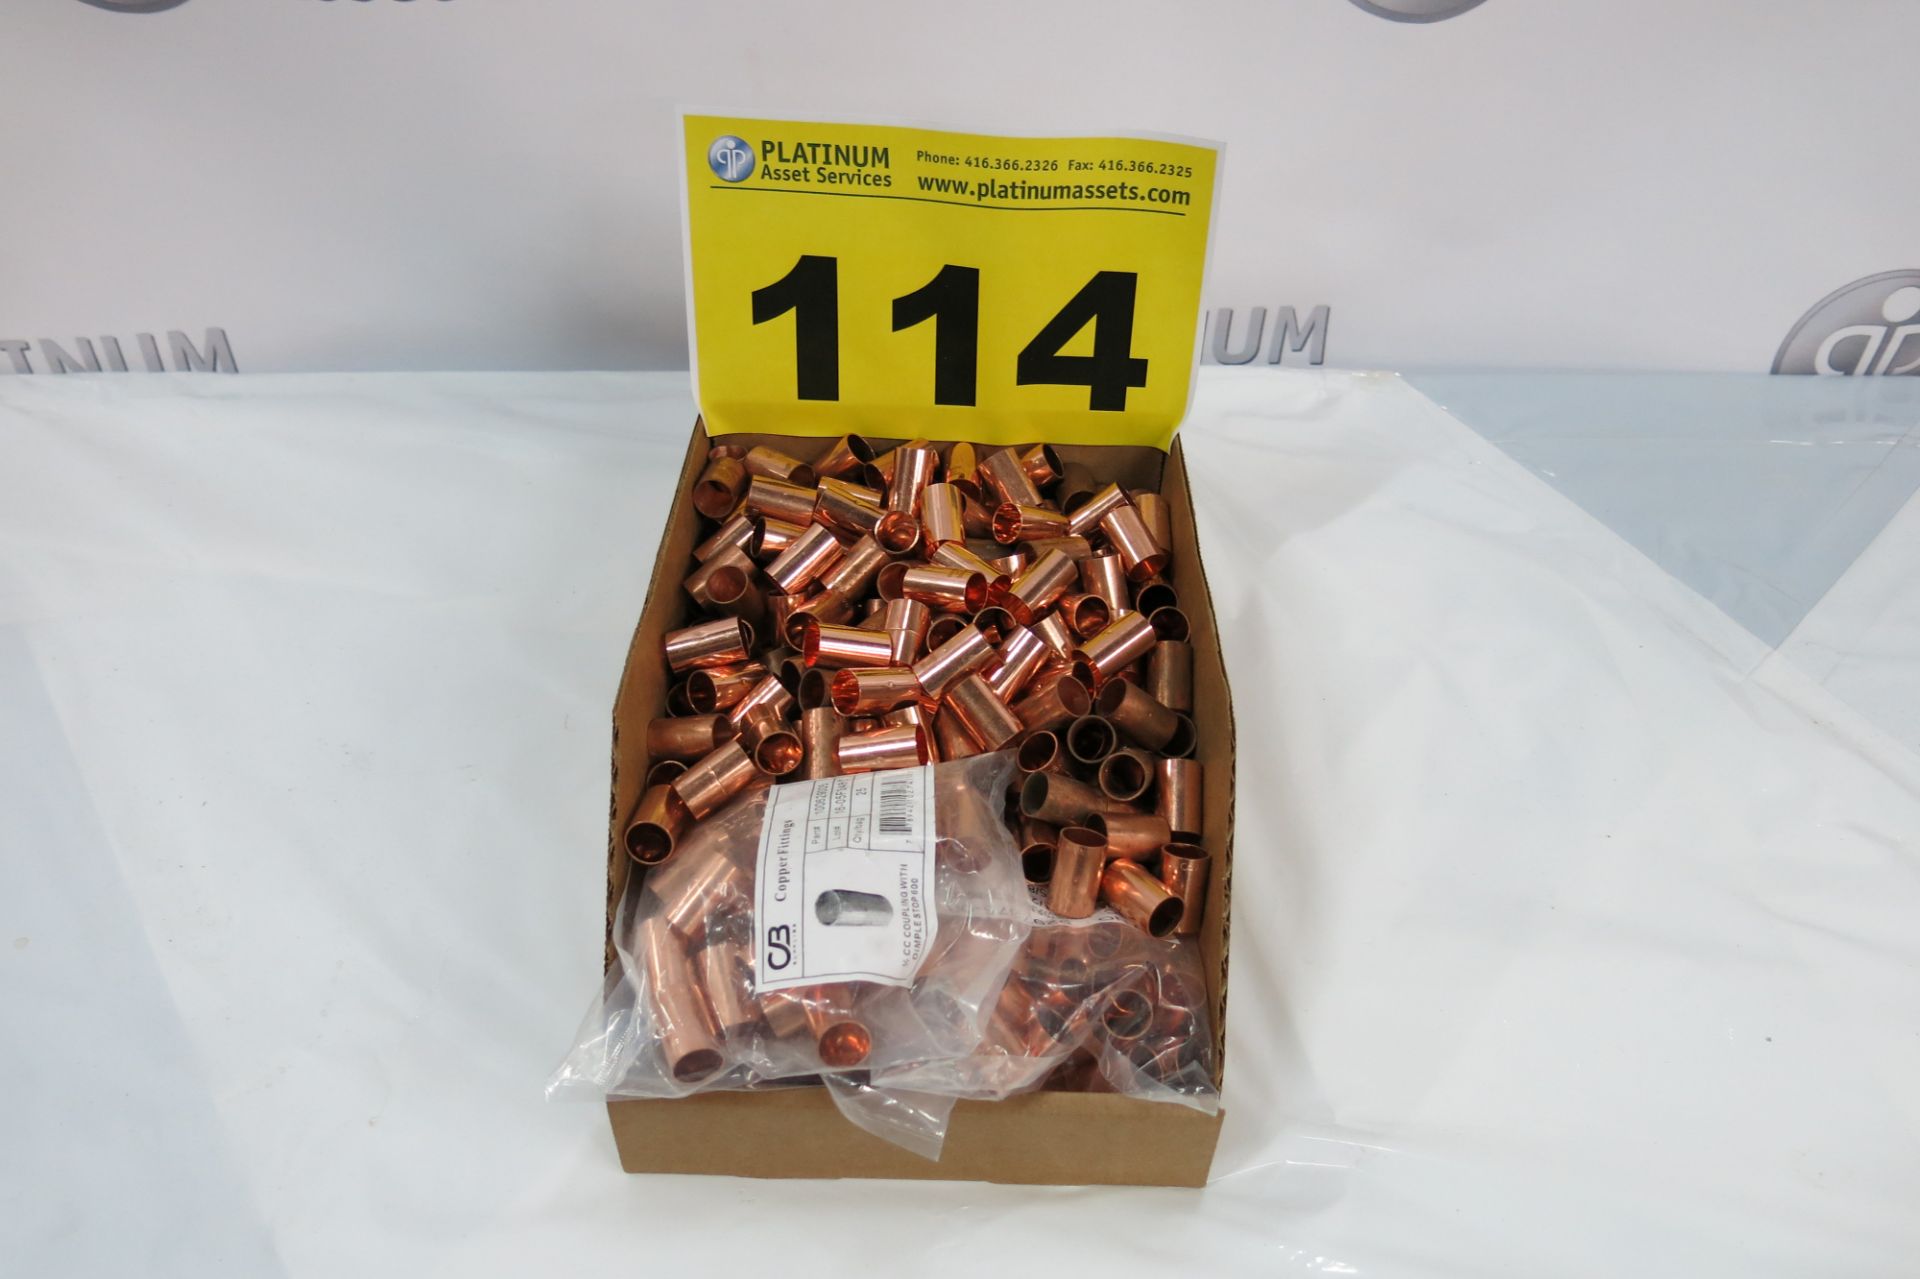 LOT OF CB SUPPLIES, 100629005, 1/2", COPPER COUPLINGS, NEW (LOCATED IN SCARBOROUGH)